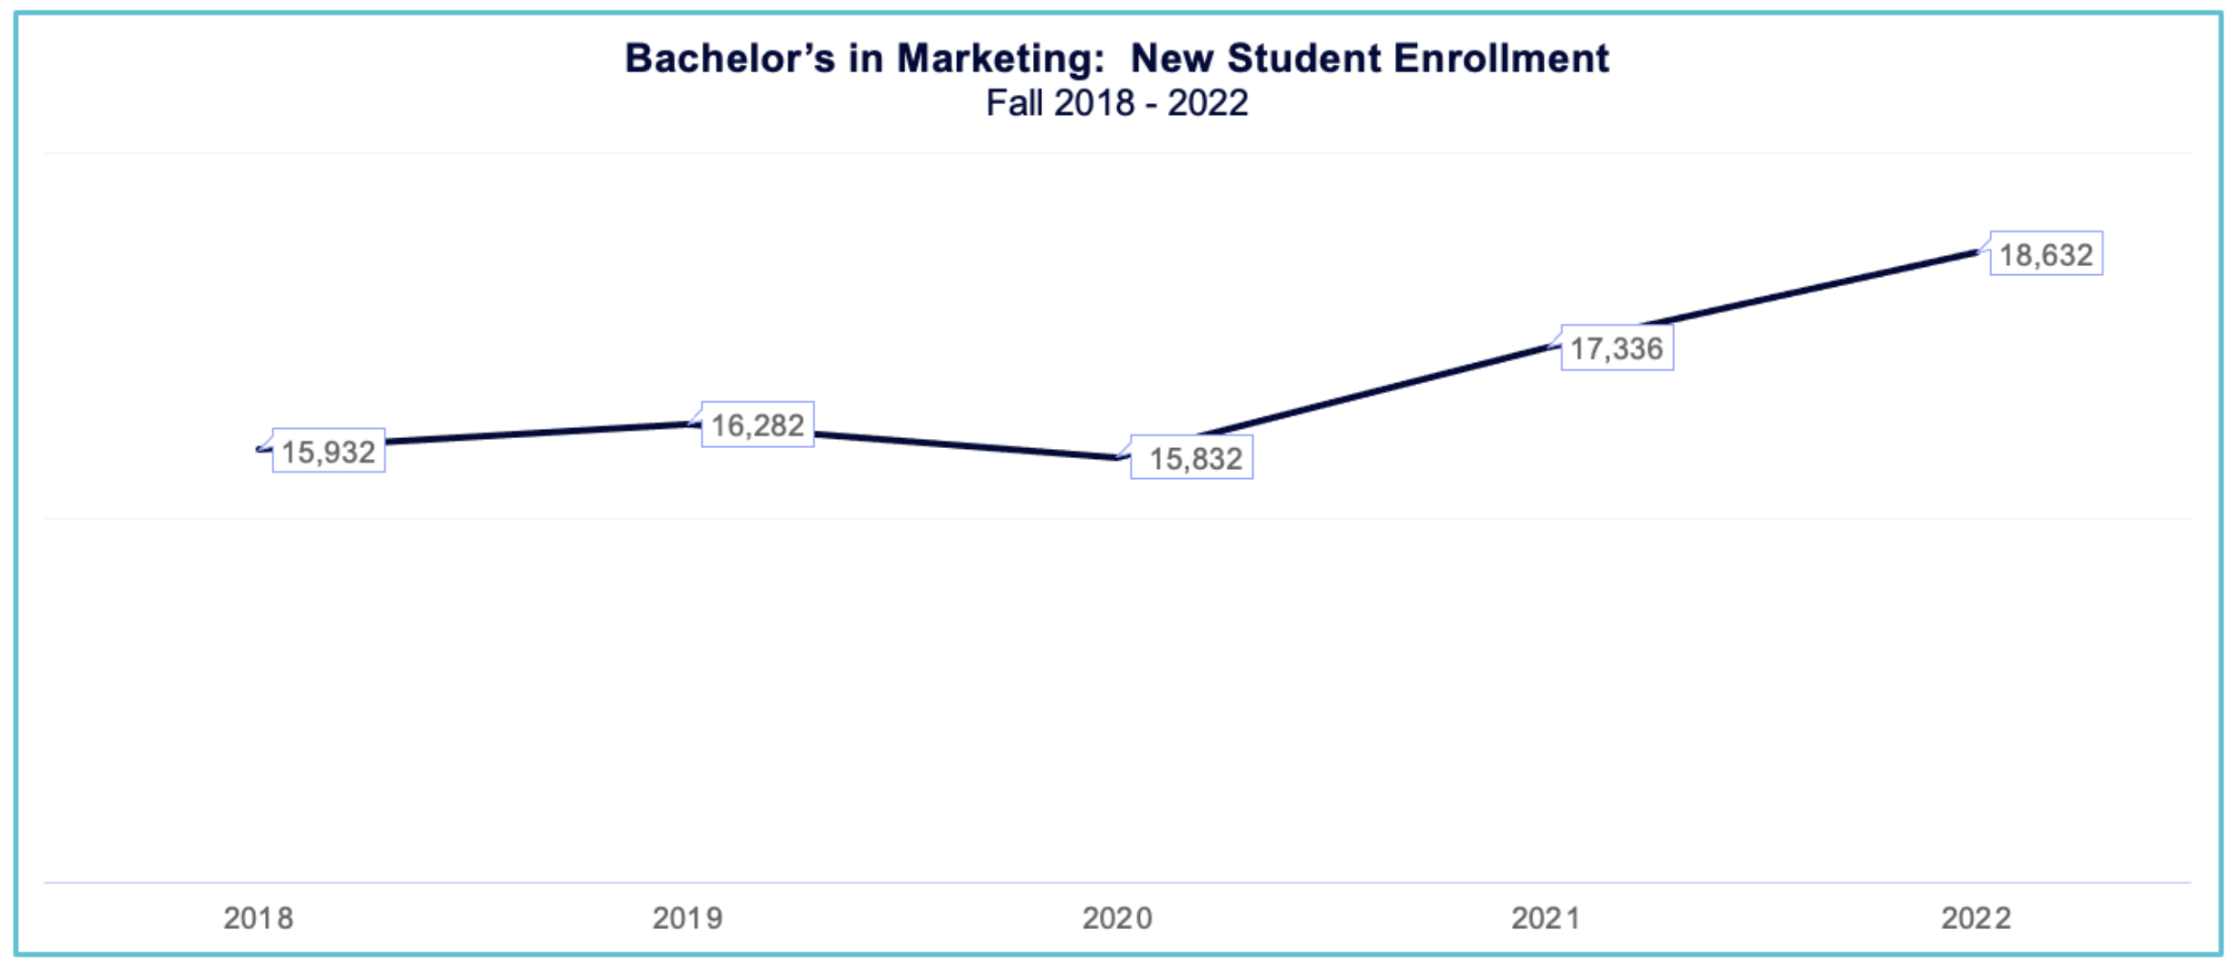 Bachelor's in Marketing: New student enrollment (fall 2018 - 2022)